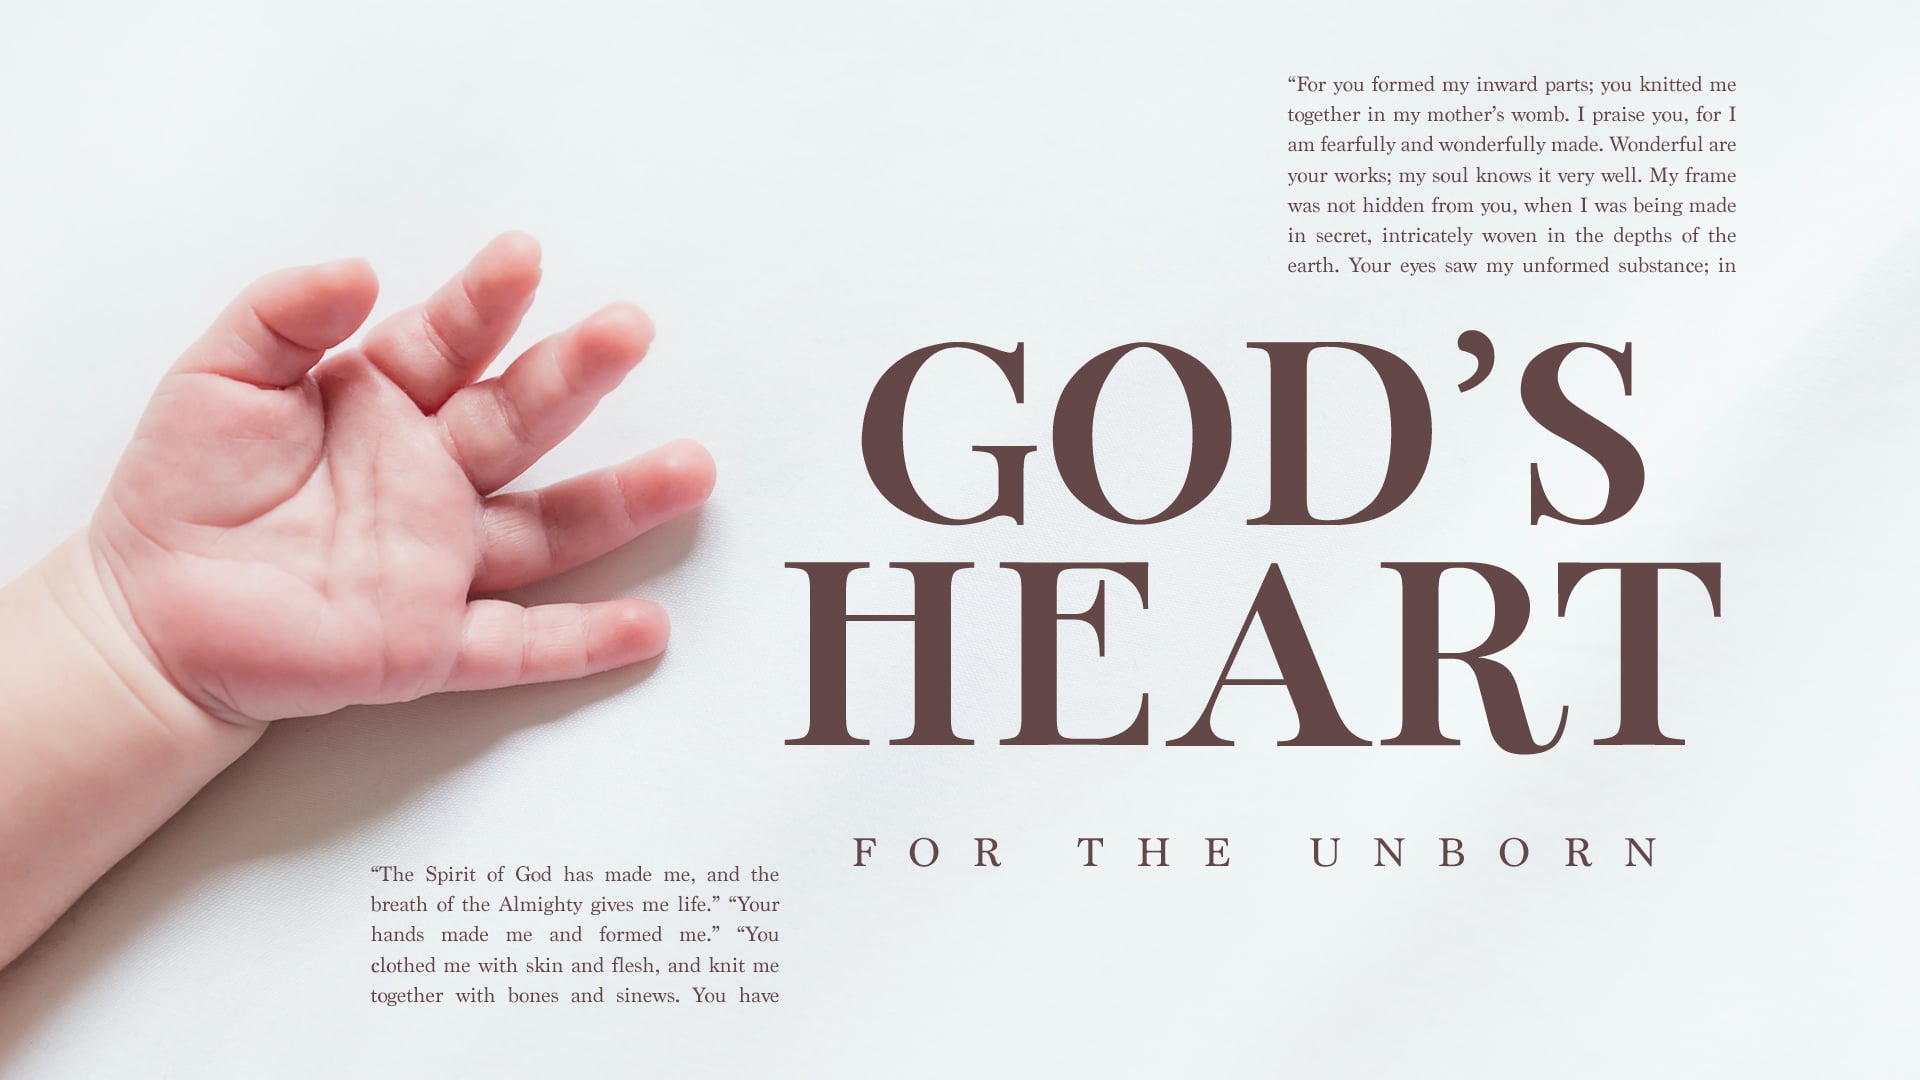 God's Heart for the Unborn